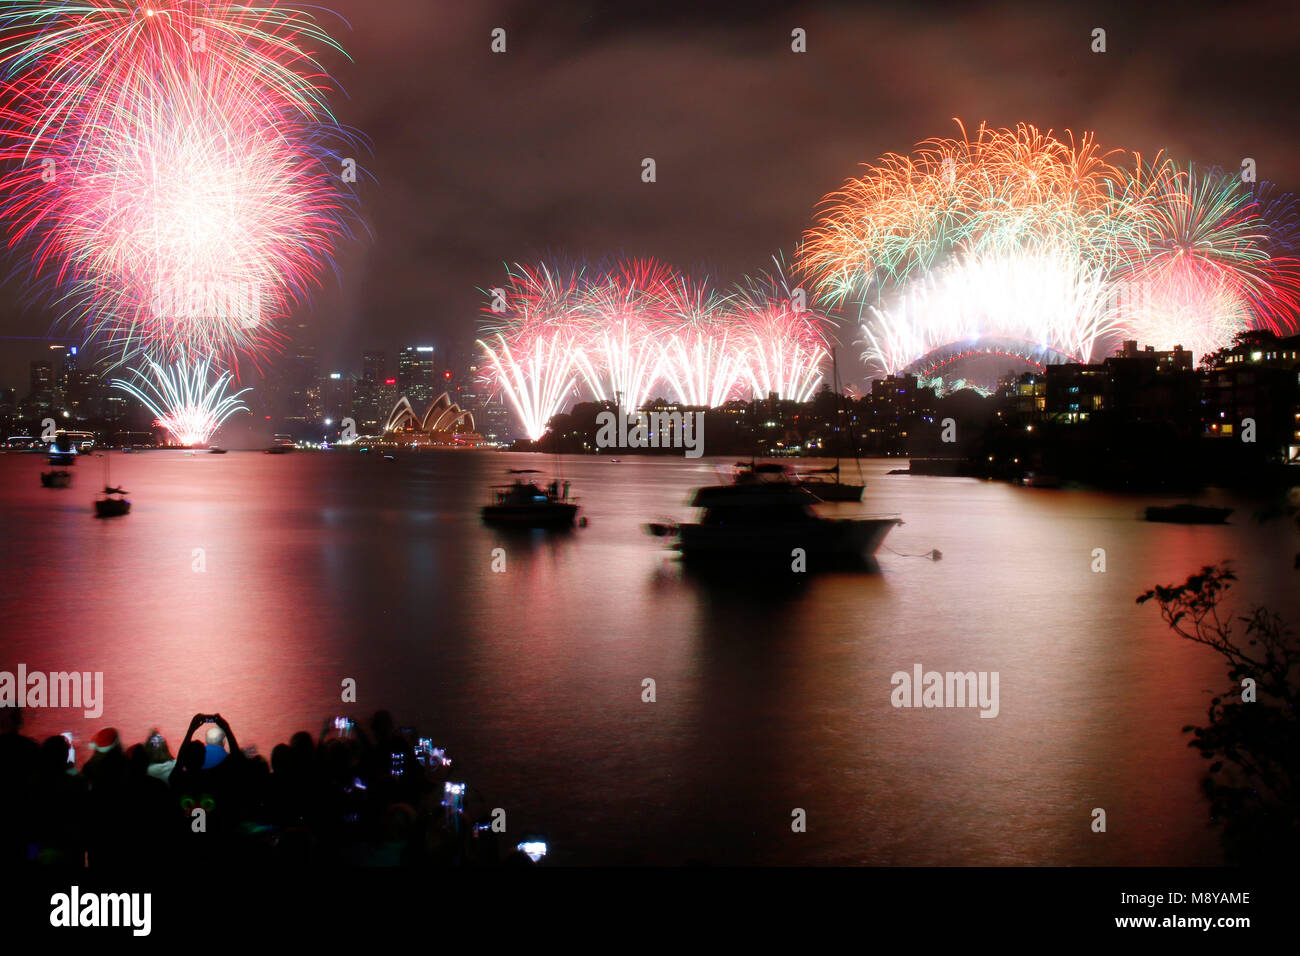 New Years Eve fireworks in Sydney: 8 tons of fireworks set the sky on fire at Sydney harbour with the Opera House and the Harbour Bridge, Sydney, Aust Stock Photo